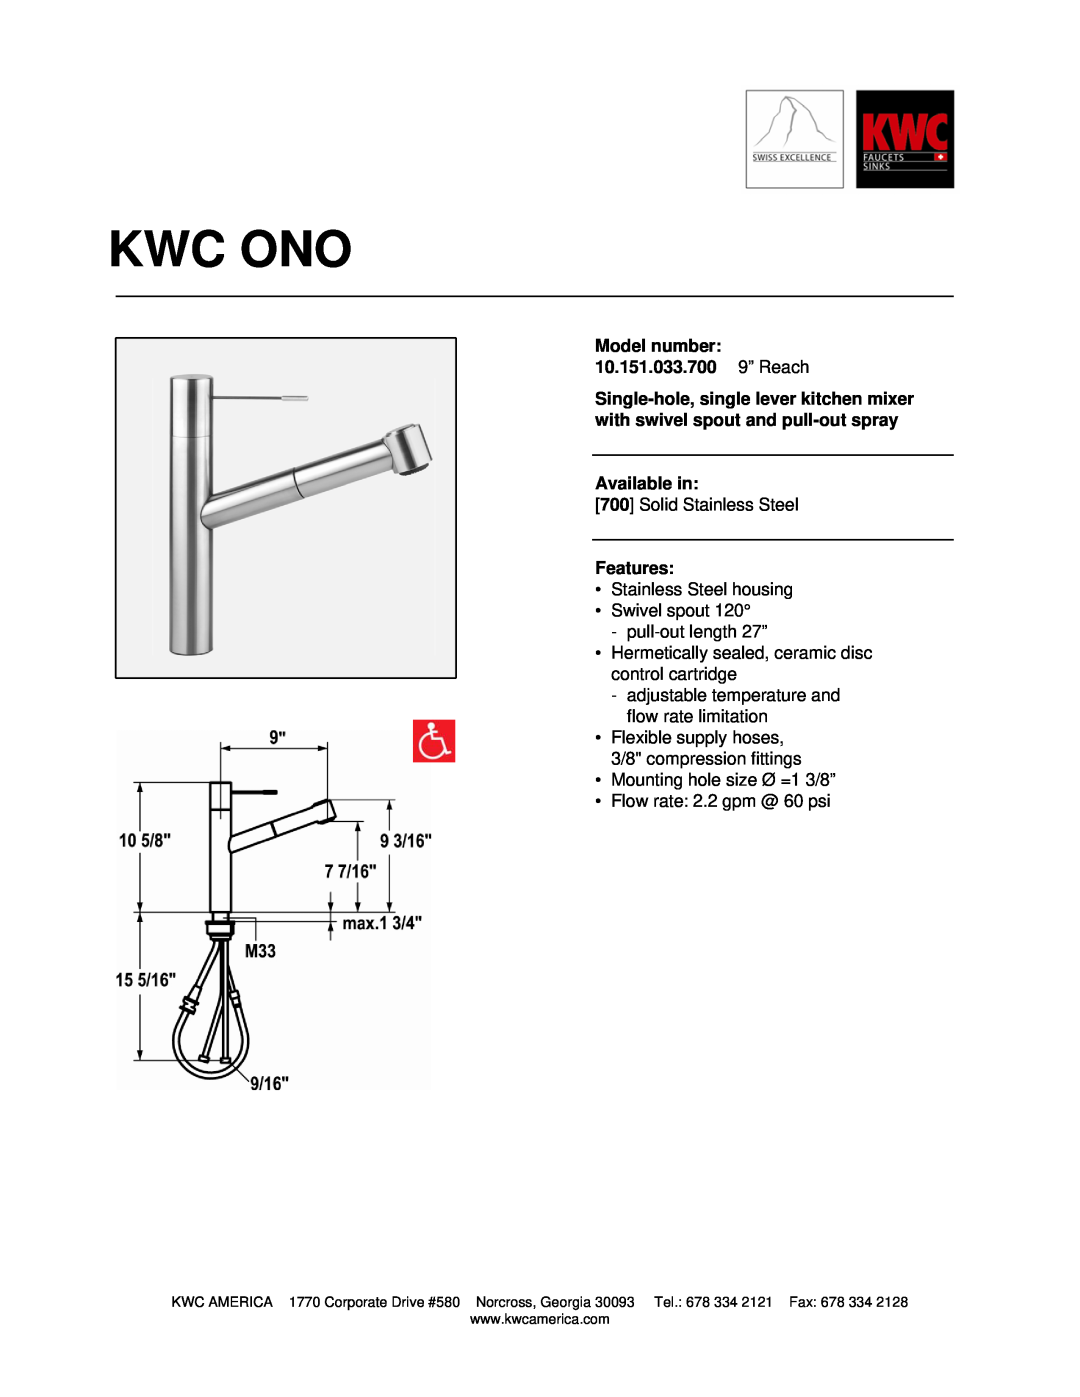 KWC manual Kwc Ono, Model number 10.151.033.700 9” Reach, Available in, Features 